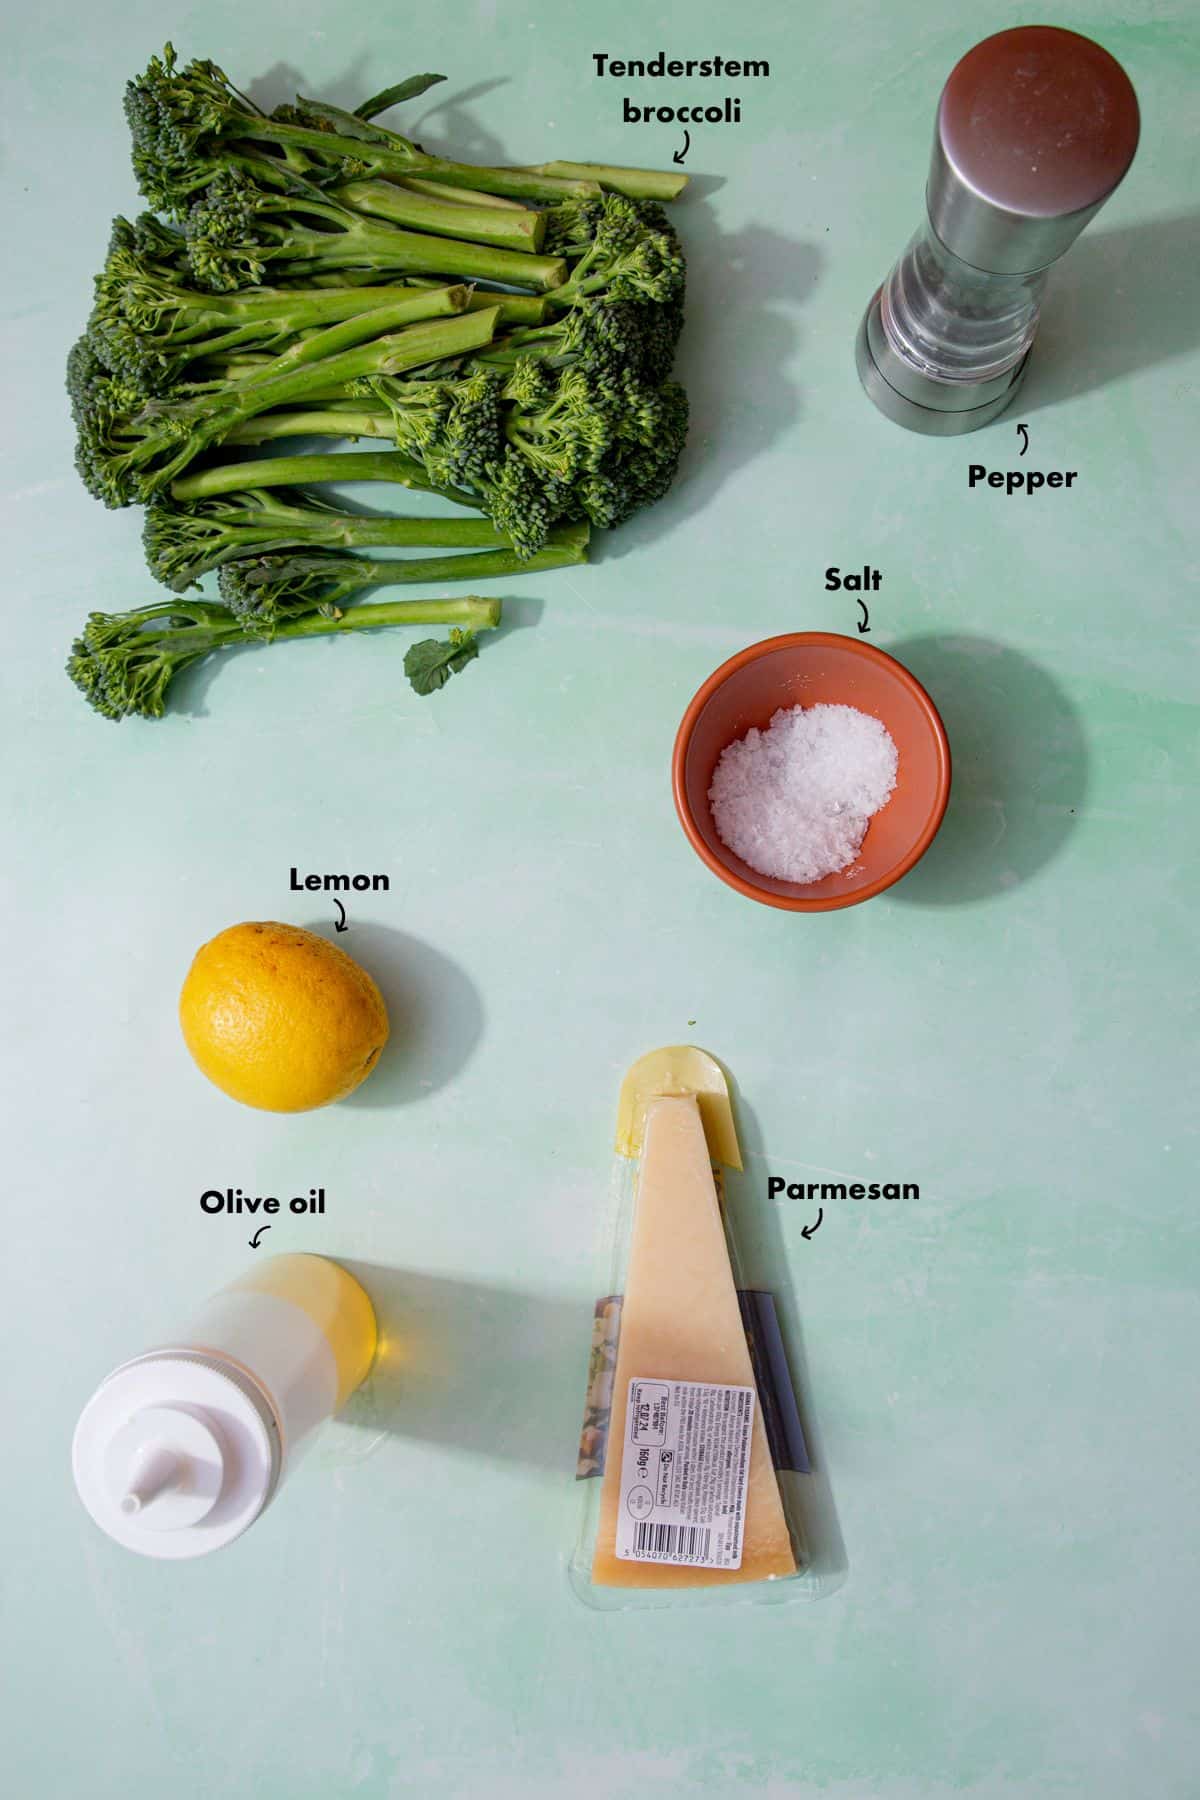 Ingredients to make roasted tenderstem broccoli laid out on a pale blue background and labelled.